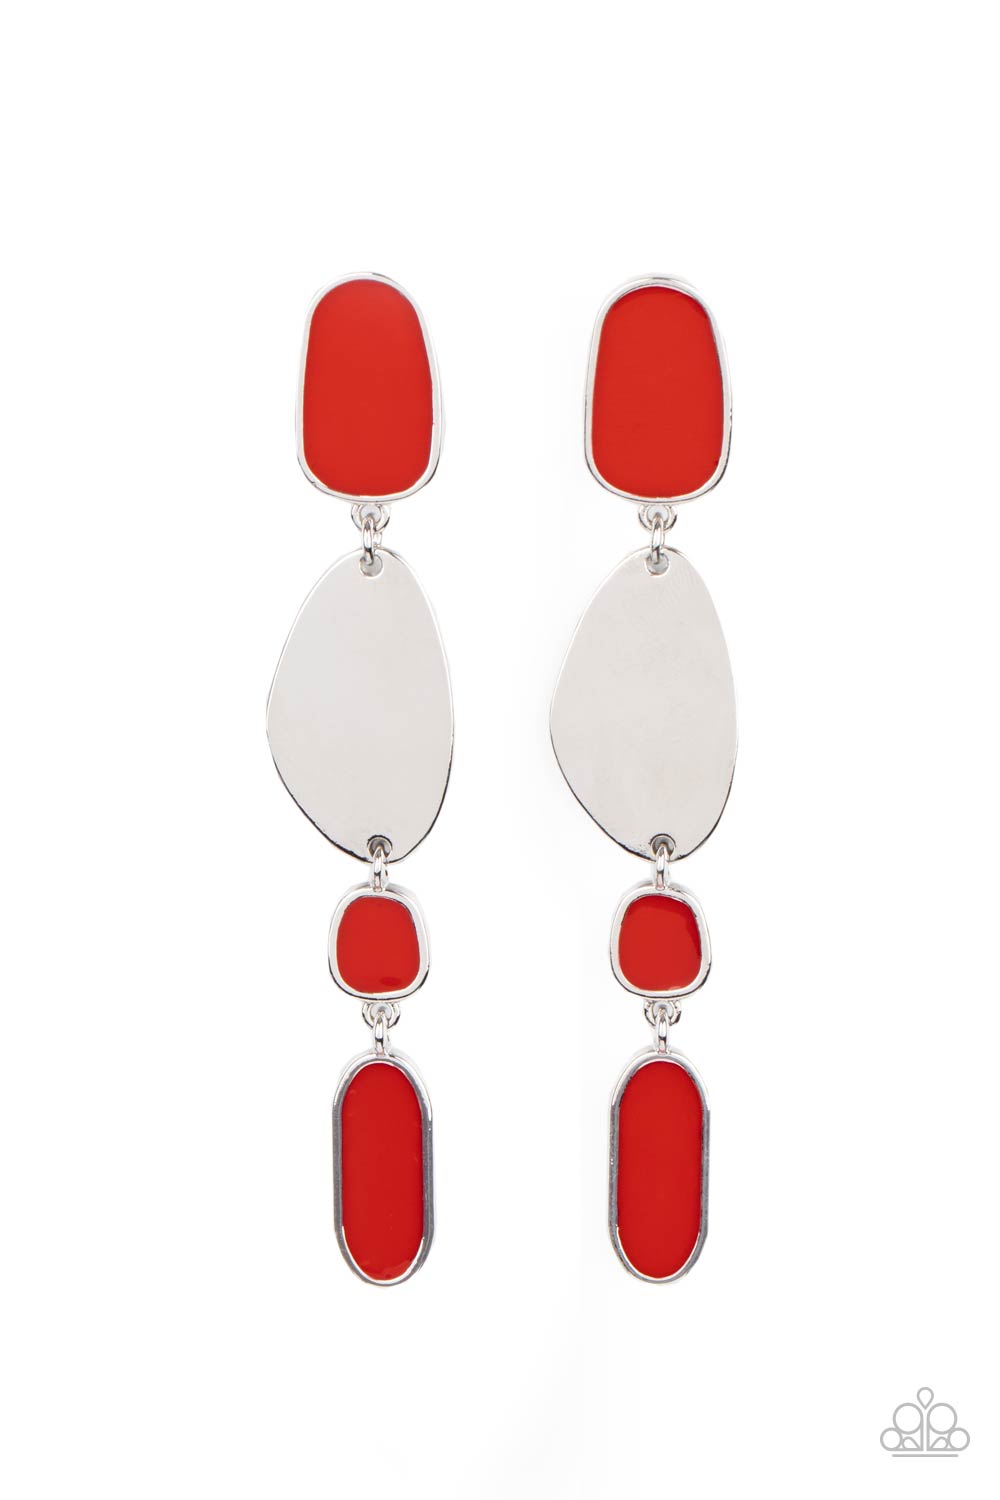 Deco By Design - Red Earrings